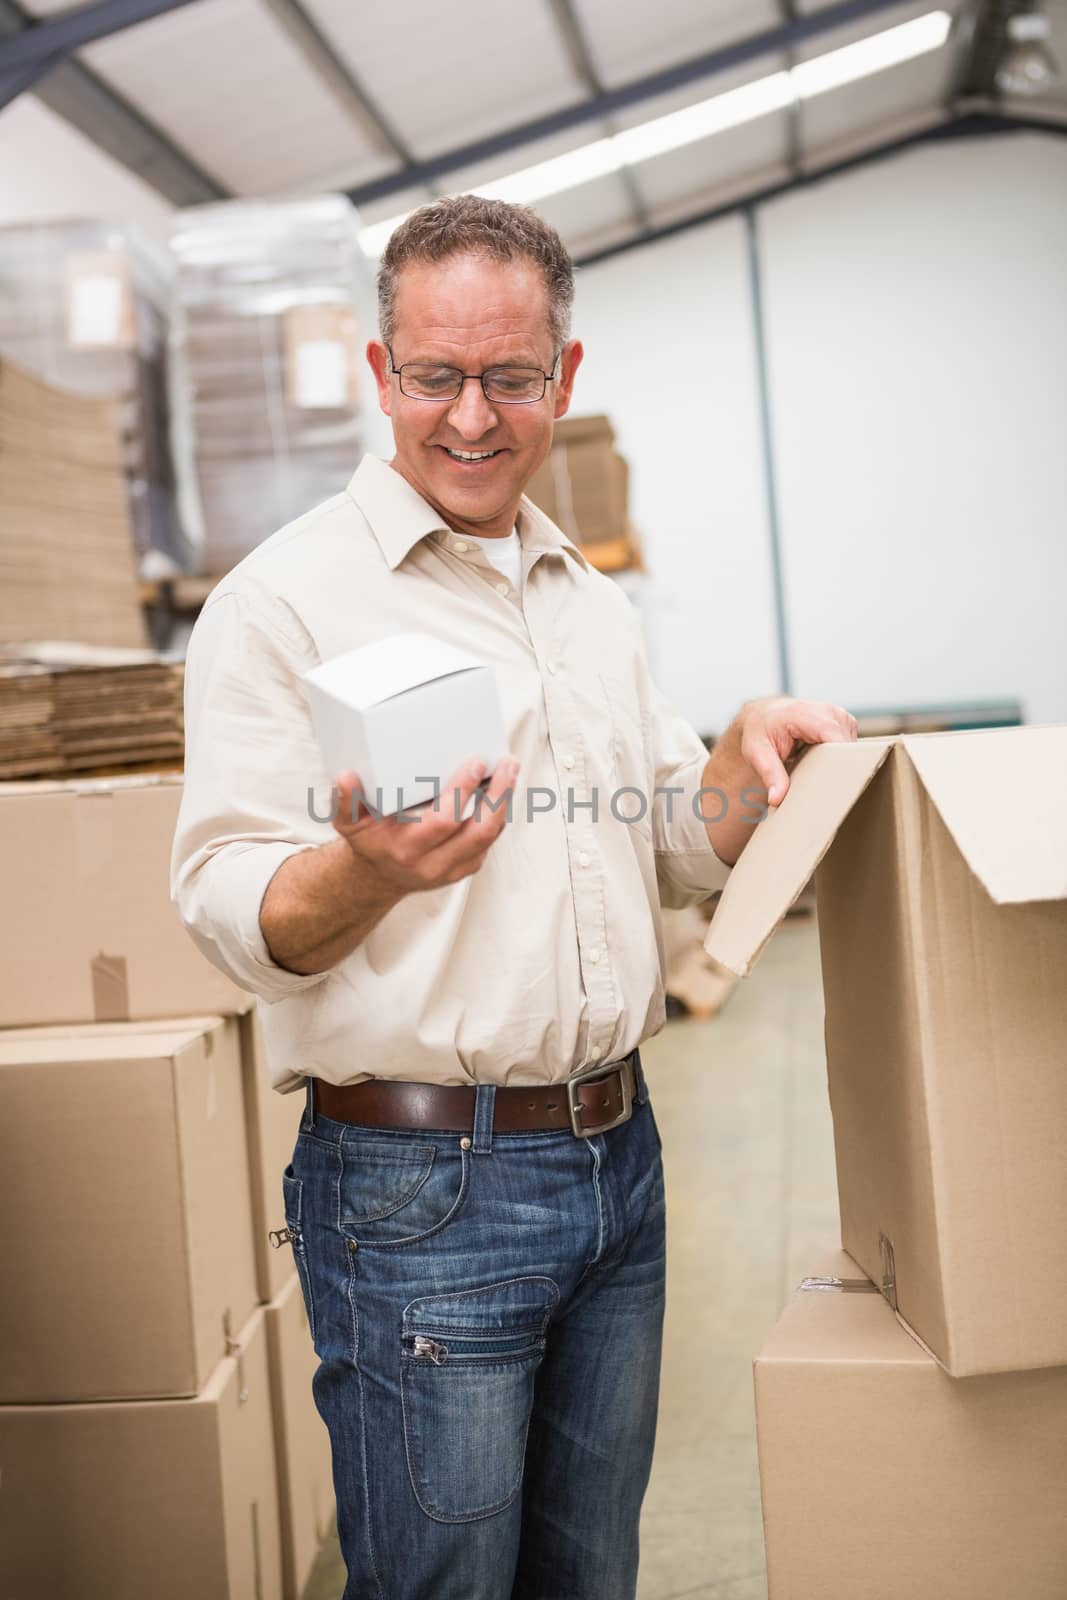 Smiling warehouse worker holding small box in a large warehouse